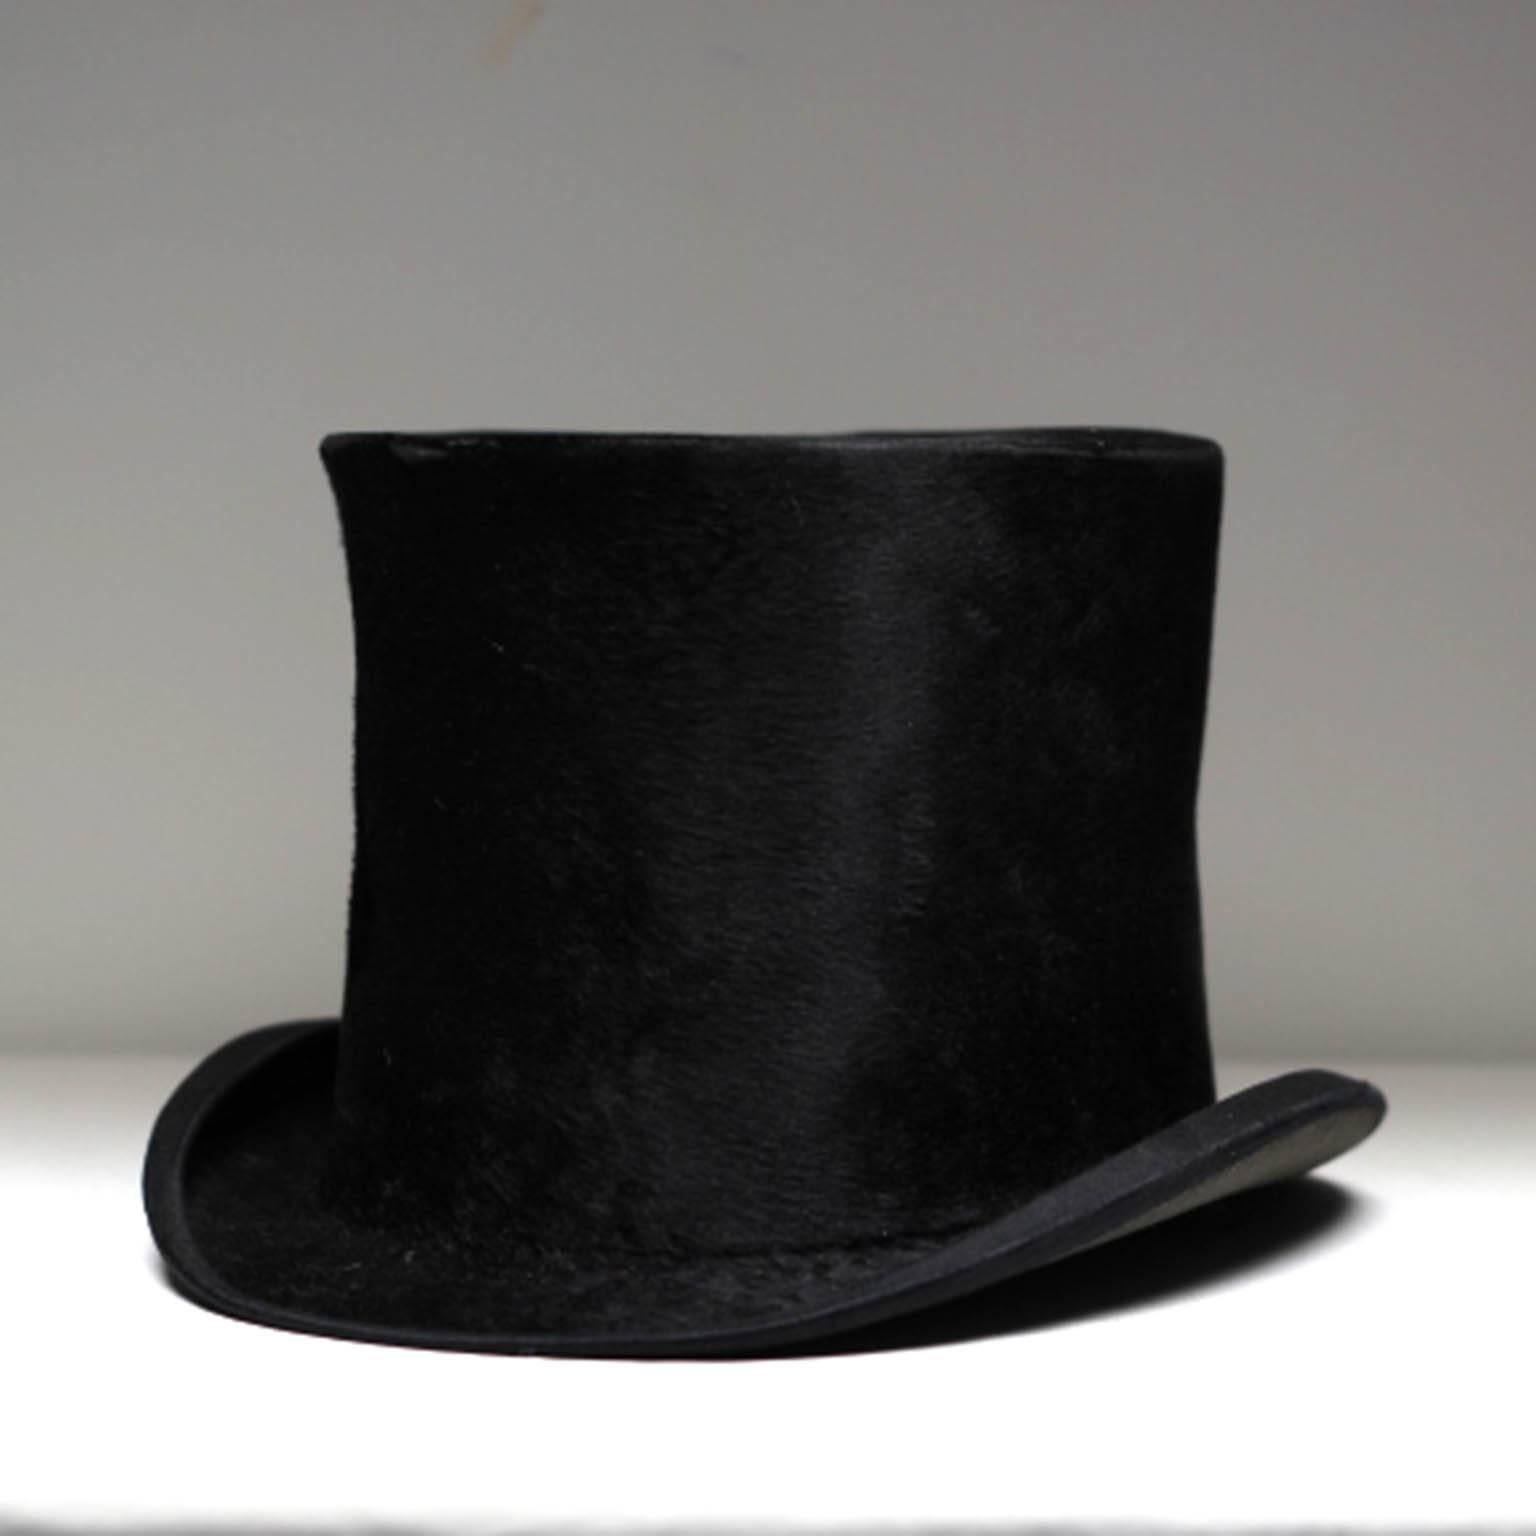 Late 19th century Victorian "Chapeaux Anglais & Americains" "The Derby" Bordeaux beaver skin top hat.
21" inner circumference.